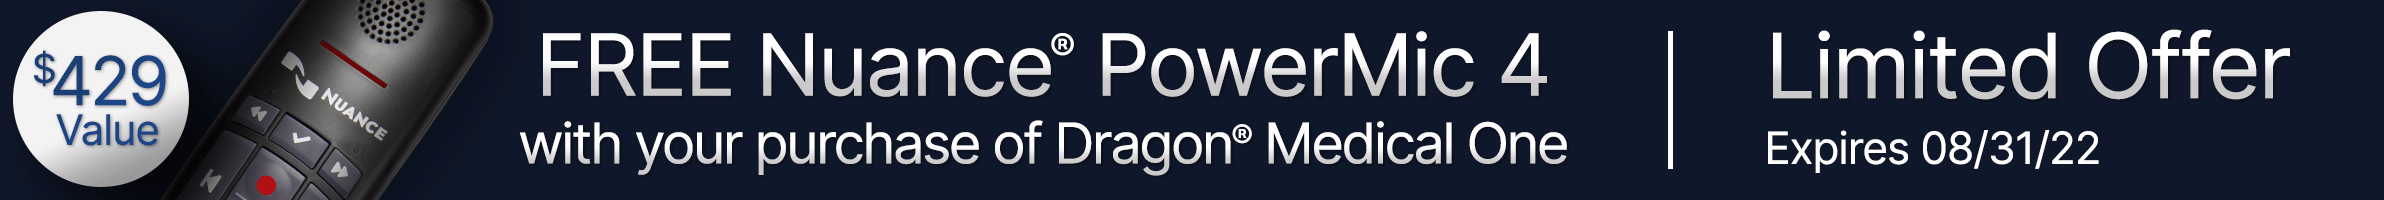 Free Nuance PowerMic 4 with purchase of Dragon Medical One by August 31, 2022